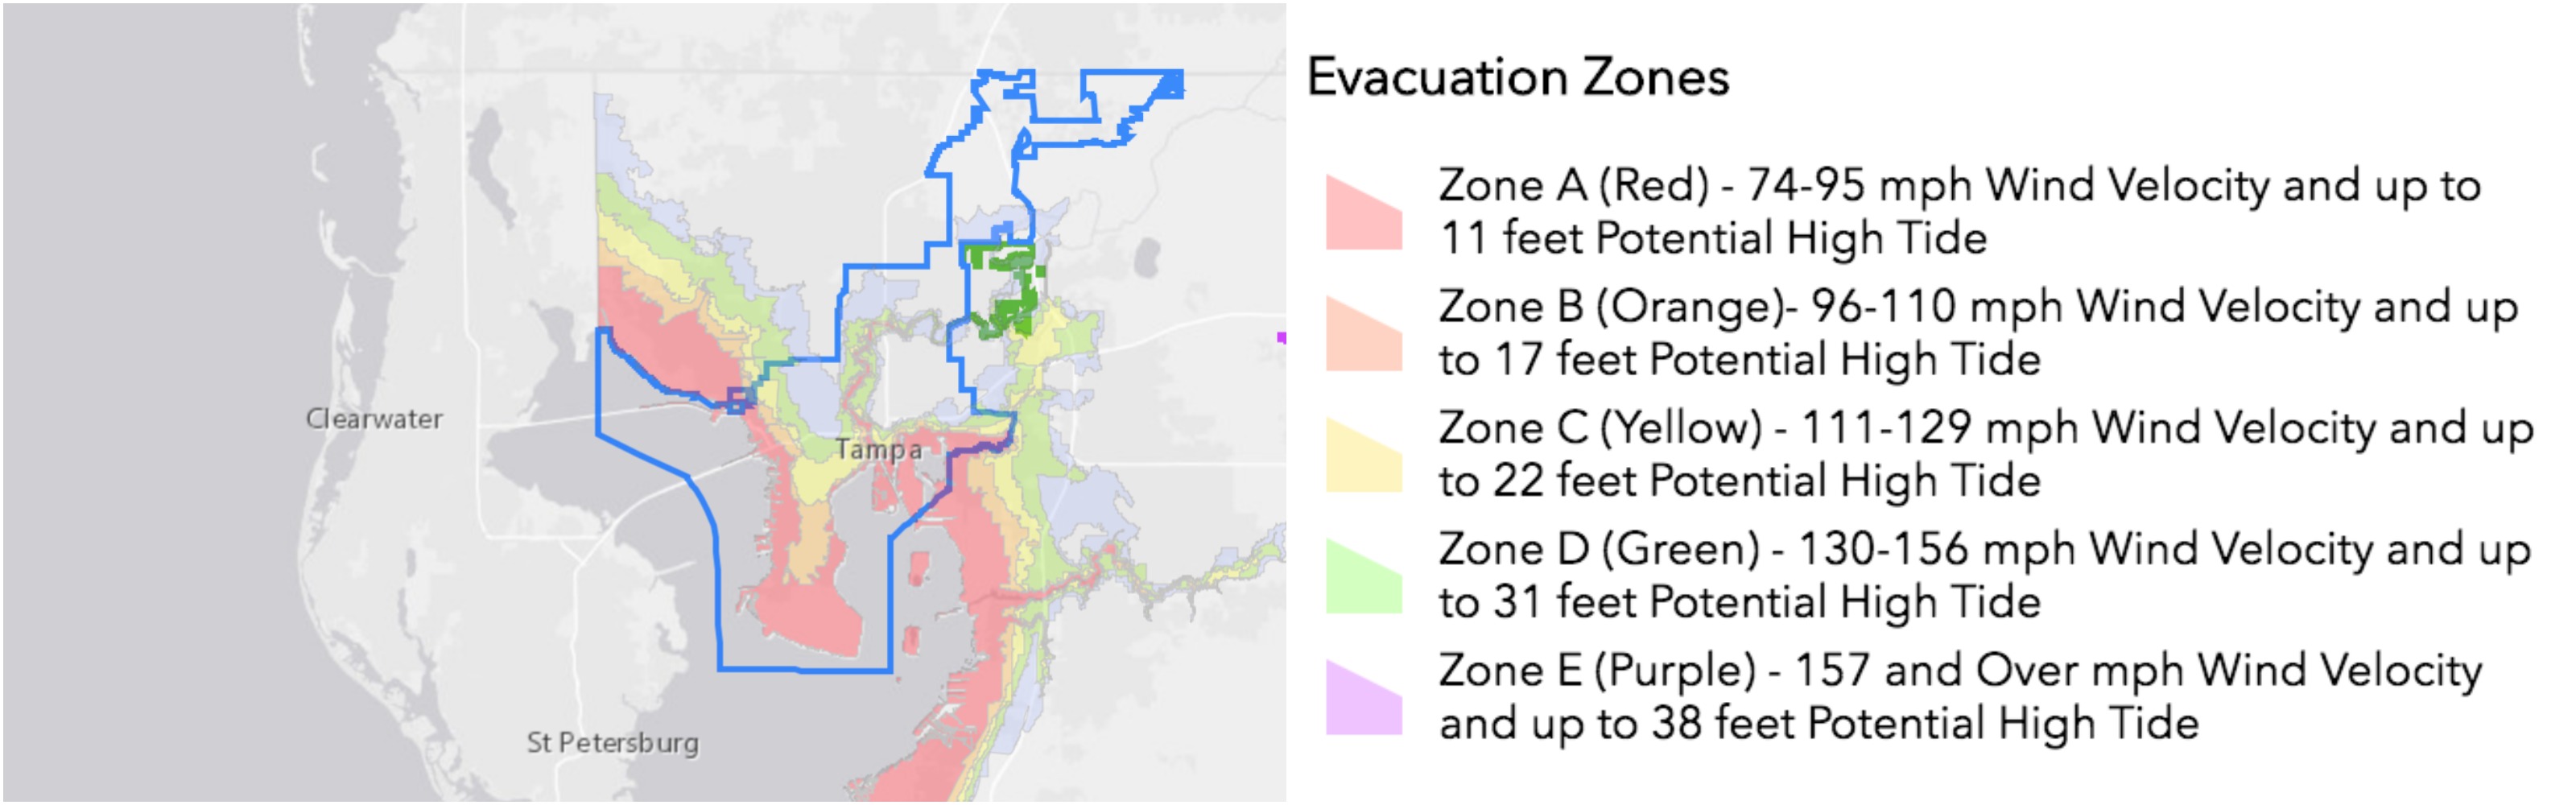 Where are mandatory evacuations being issued in Florida?